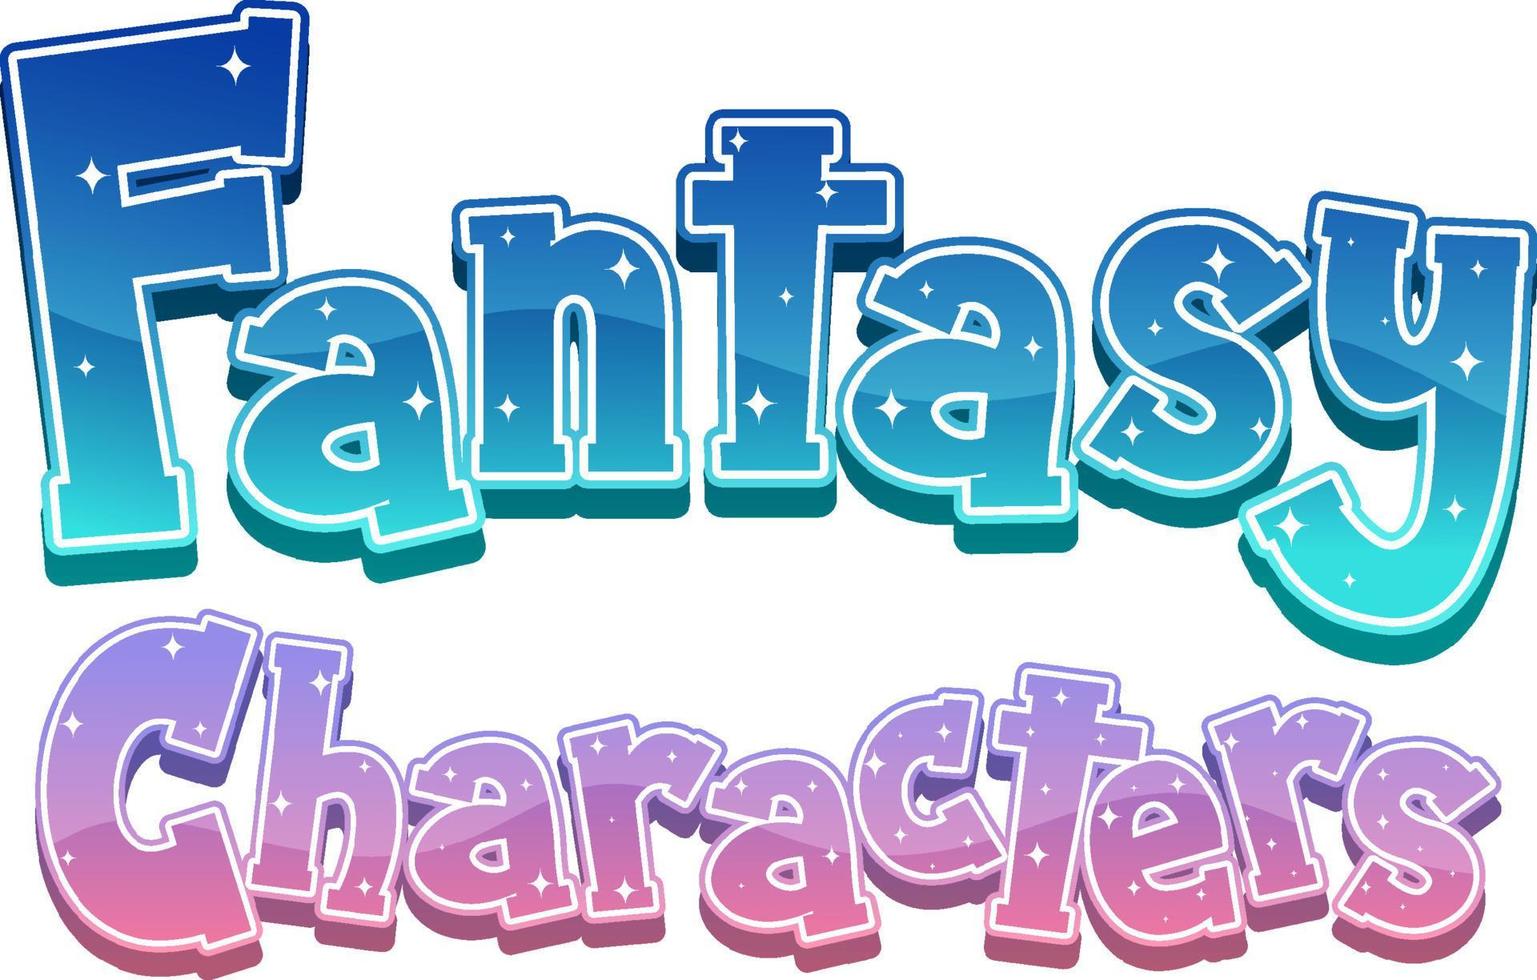 Fantasy Characters text word in cartoon style vector